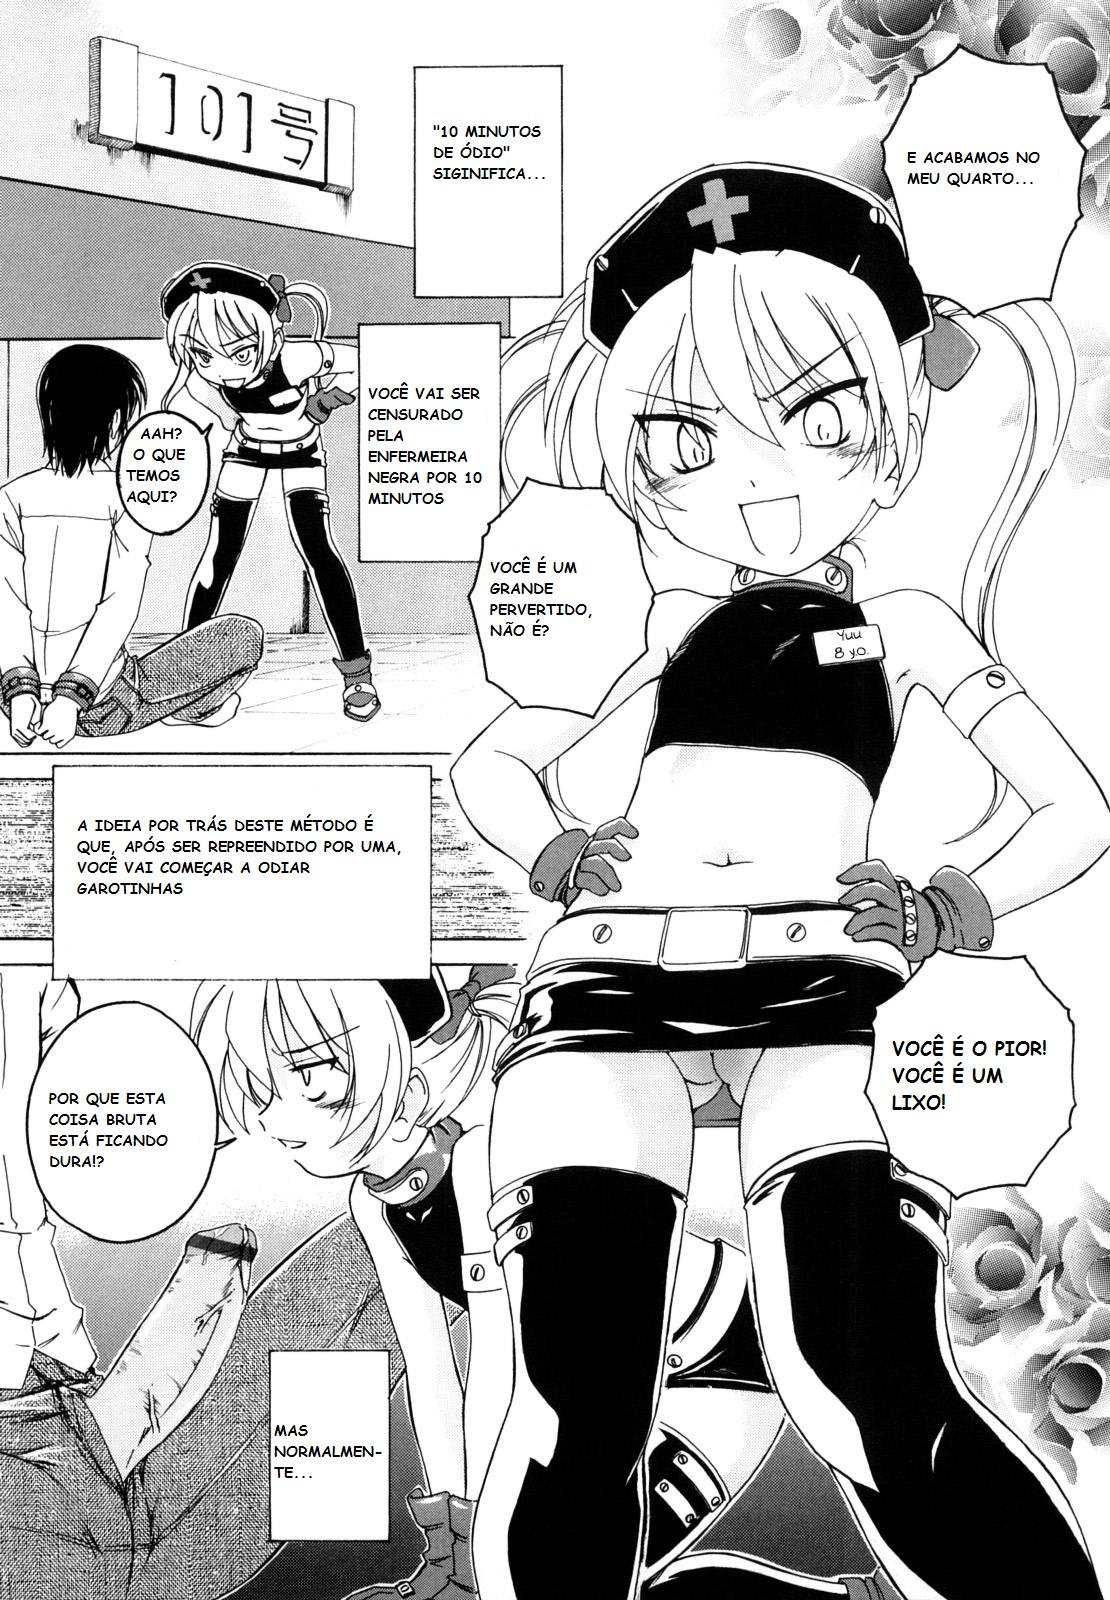 Hentaihome – Lolicons no hospital (17)